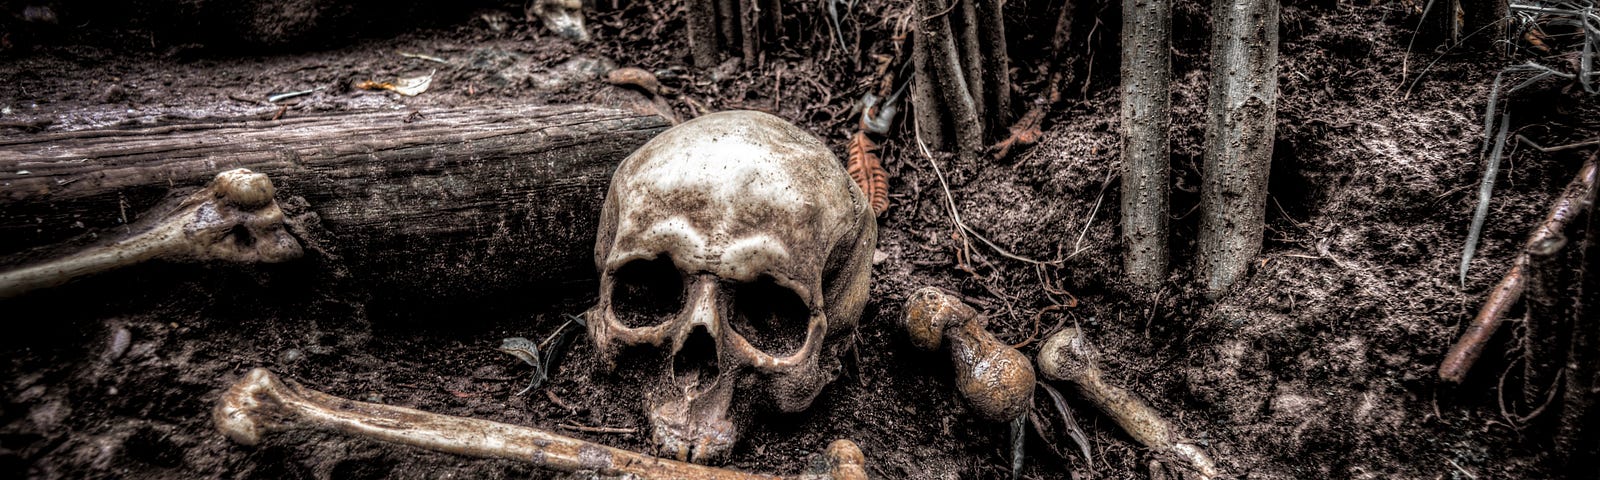 Partially buried skull and bones in the woods.